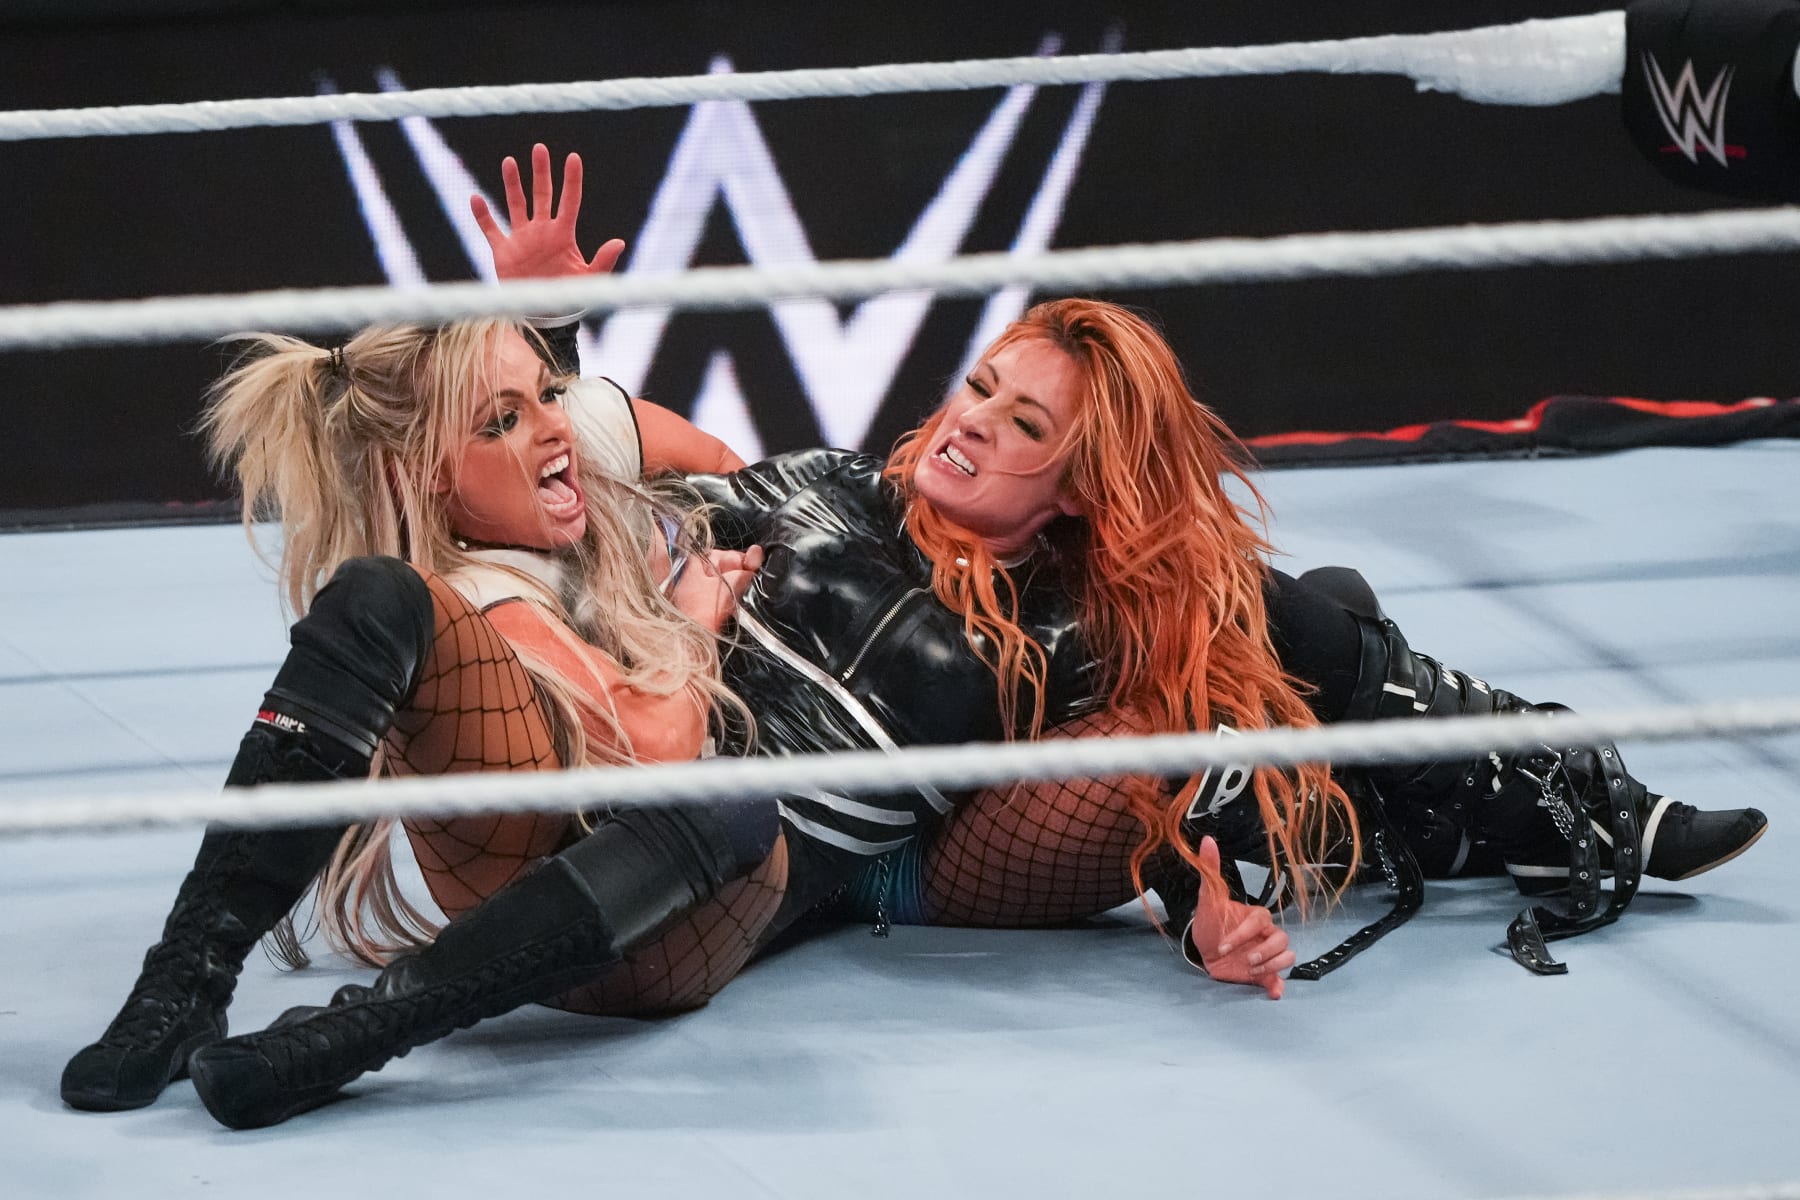 Becky Lynch and Liv Morgan to Compete in Women’s World Championship Match on WWE Raw